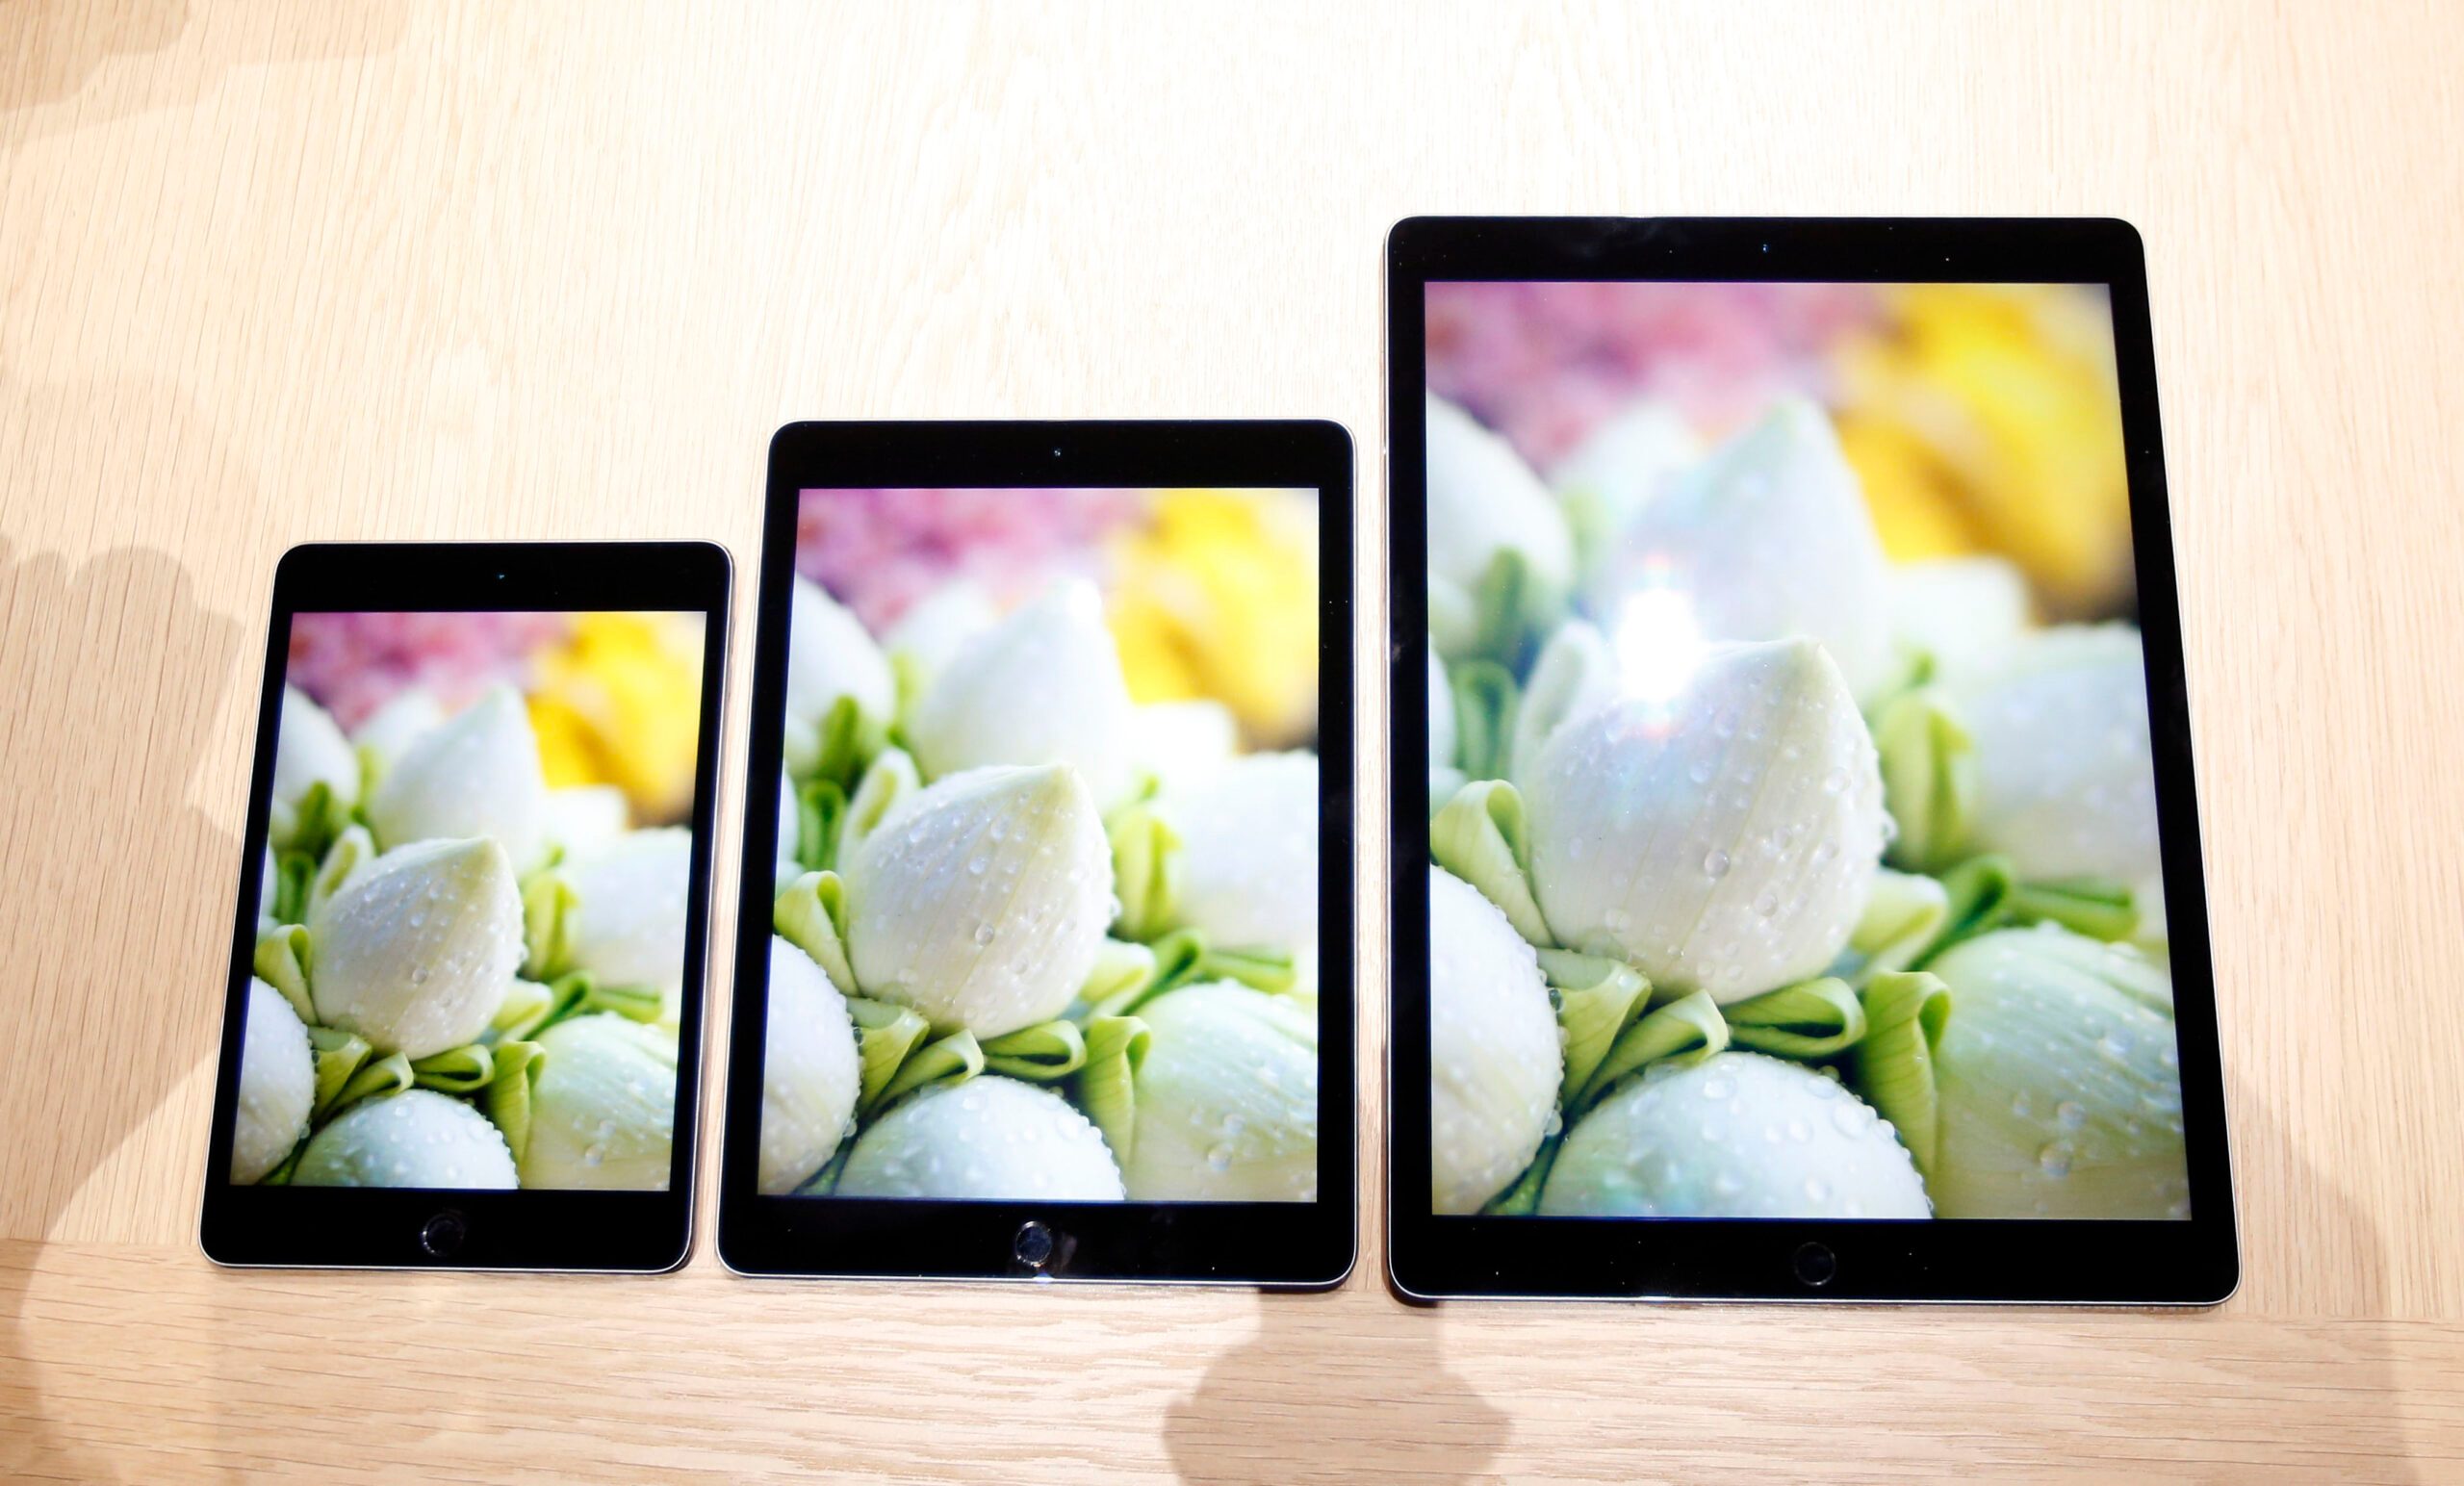 Tablet market ended 2015 on weak note – research firm